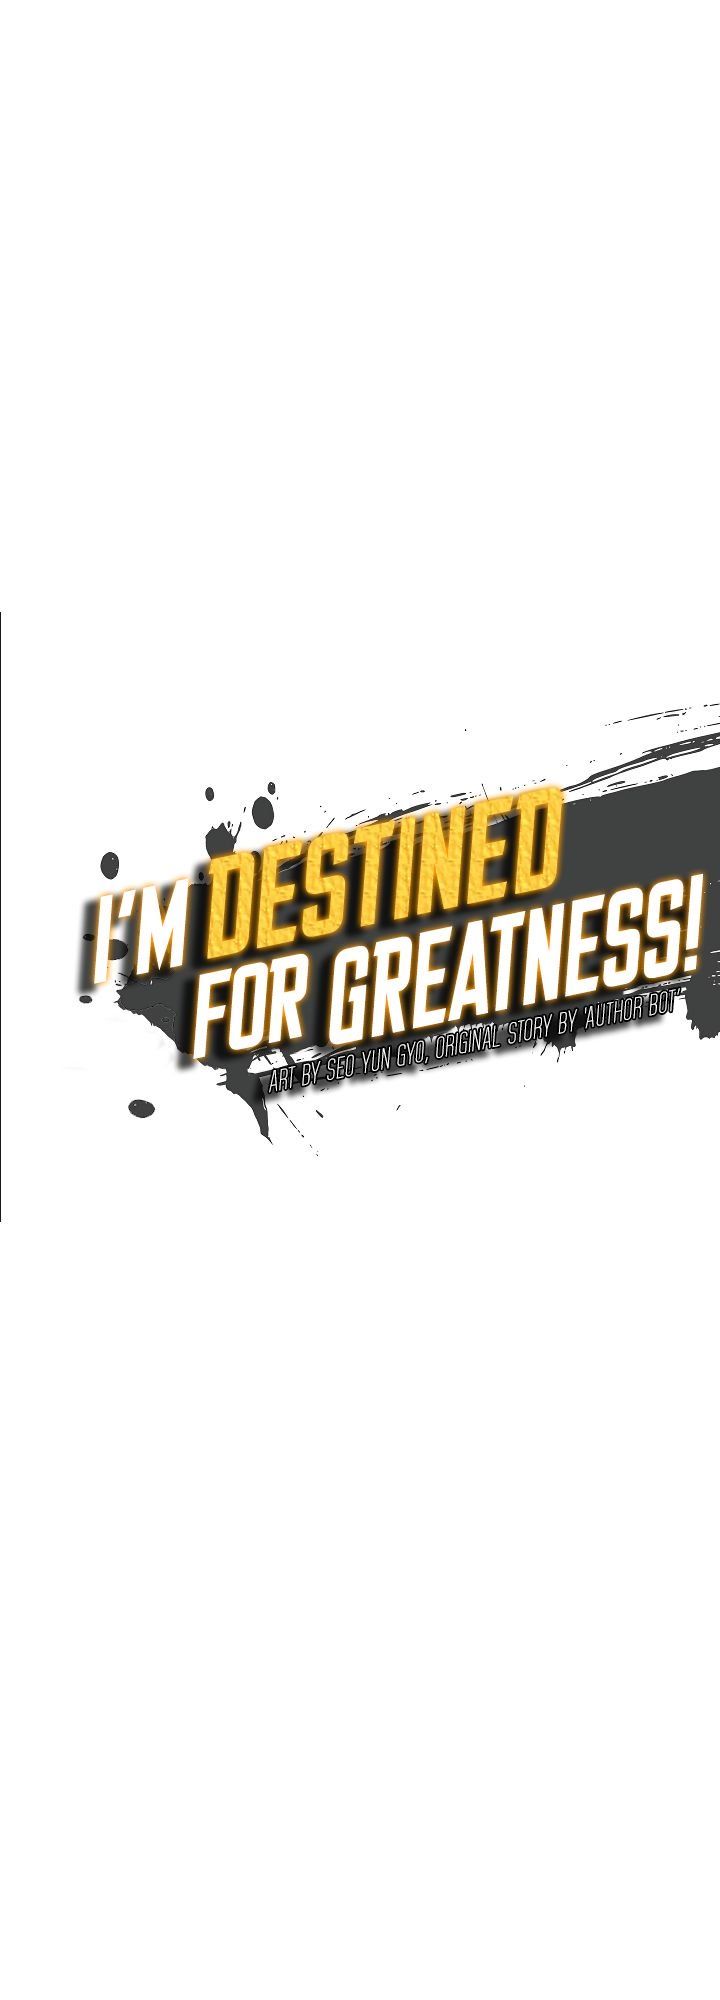 Im Destined For Greatness 19 14